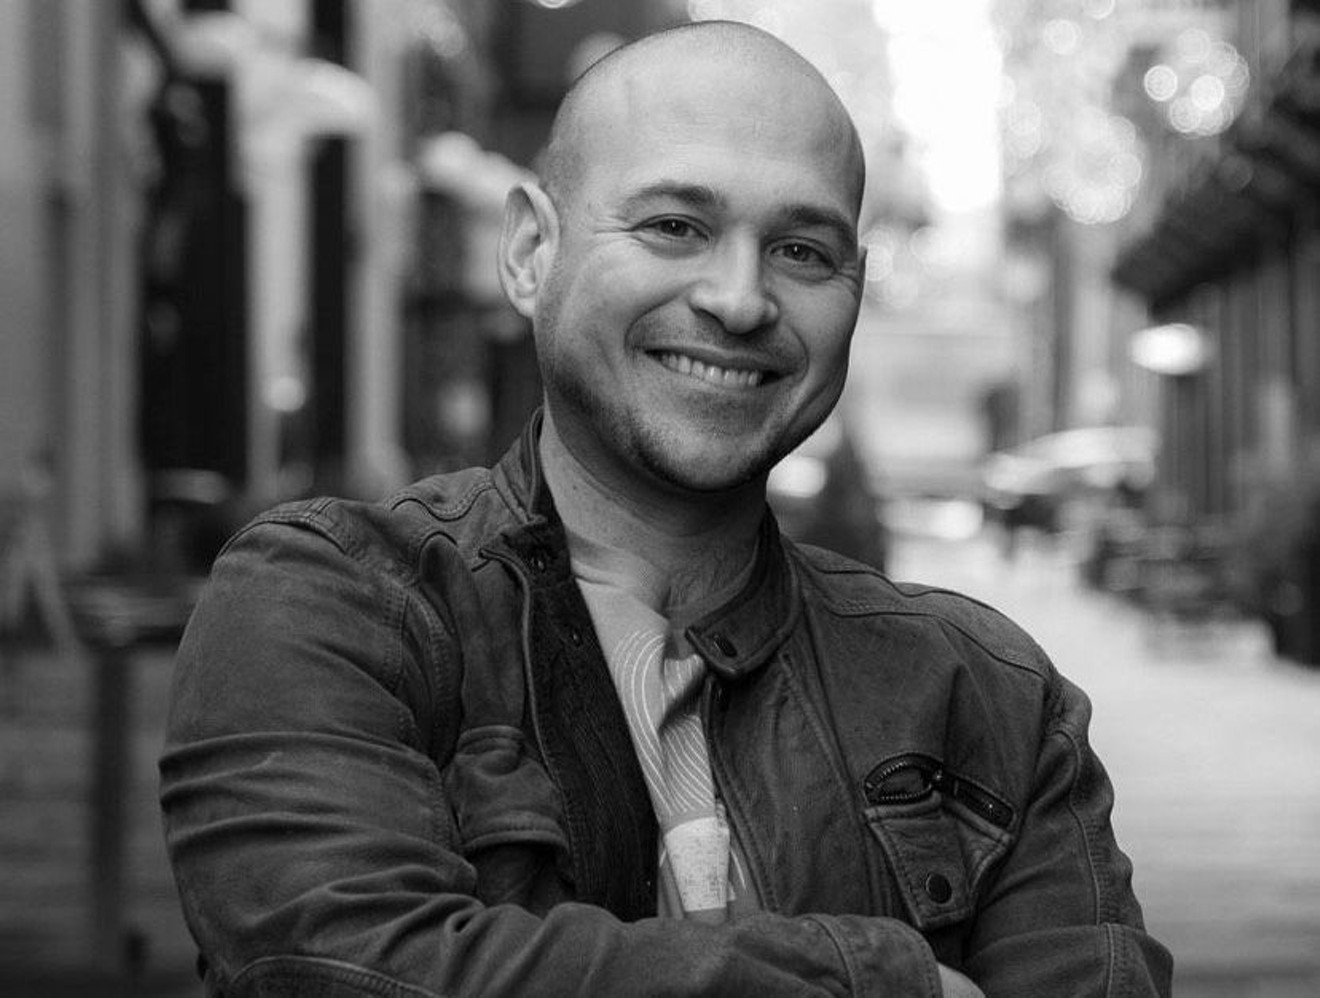 Jon Marcantoni of Flamboyán Theater is seeking unproduced plays for the Emerging BIPOC Playwrights Project.